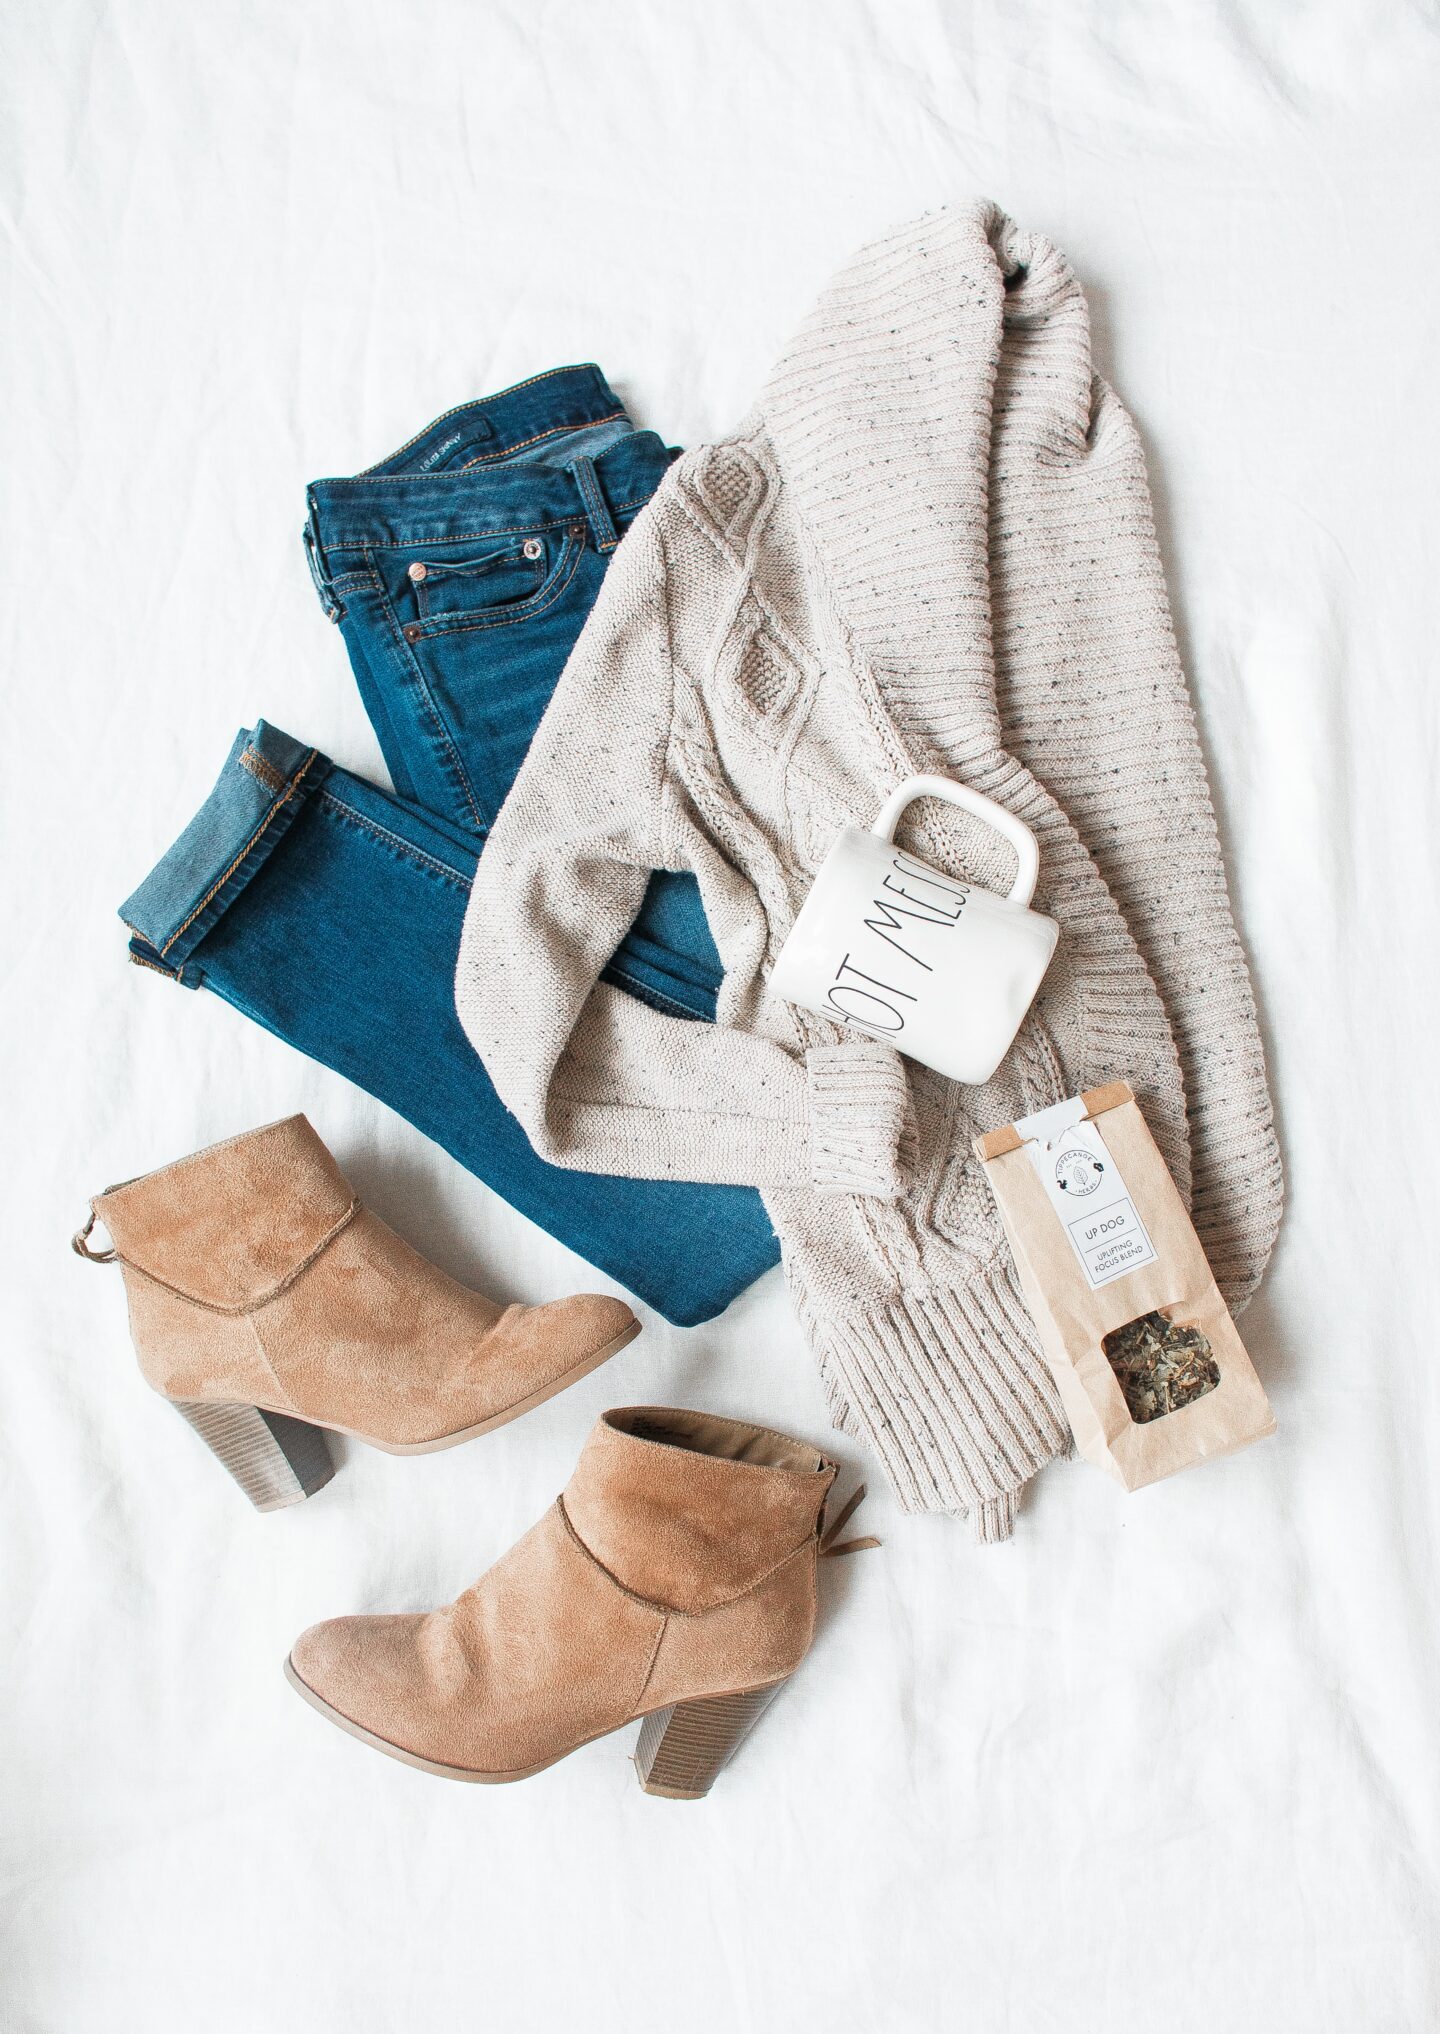 Fall outfit, cozy sweater, jeans, booties